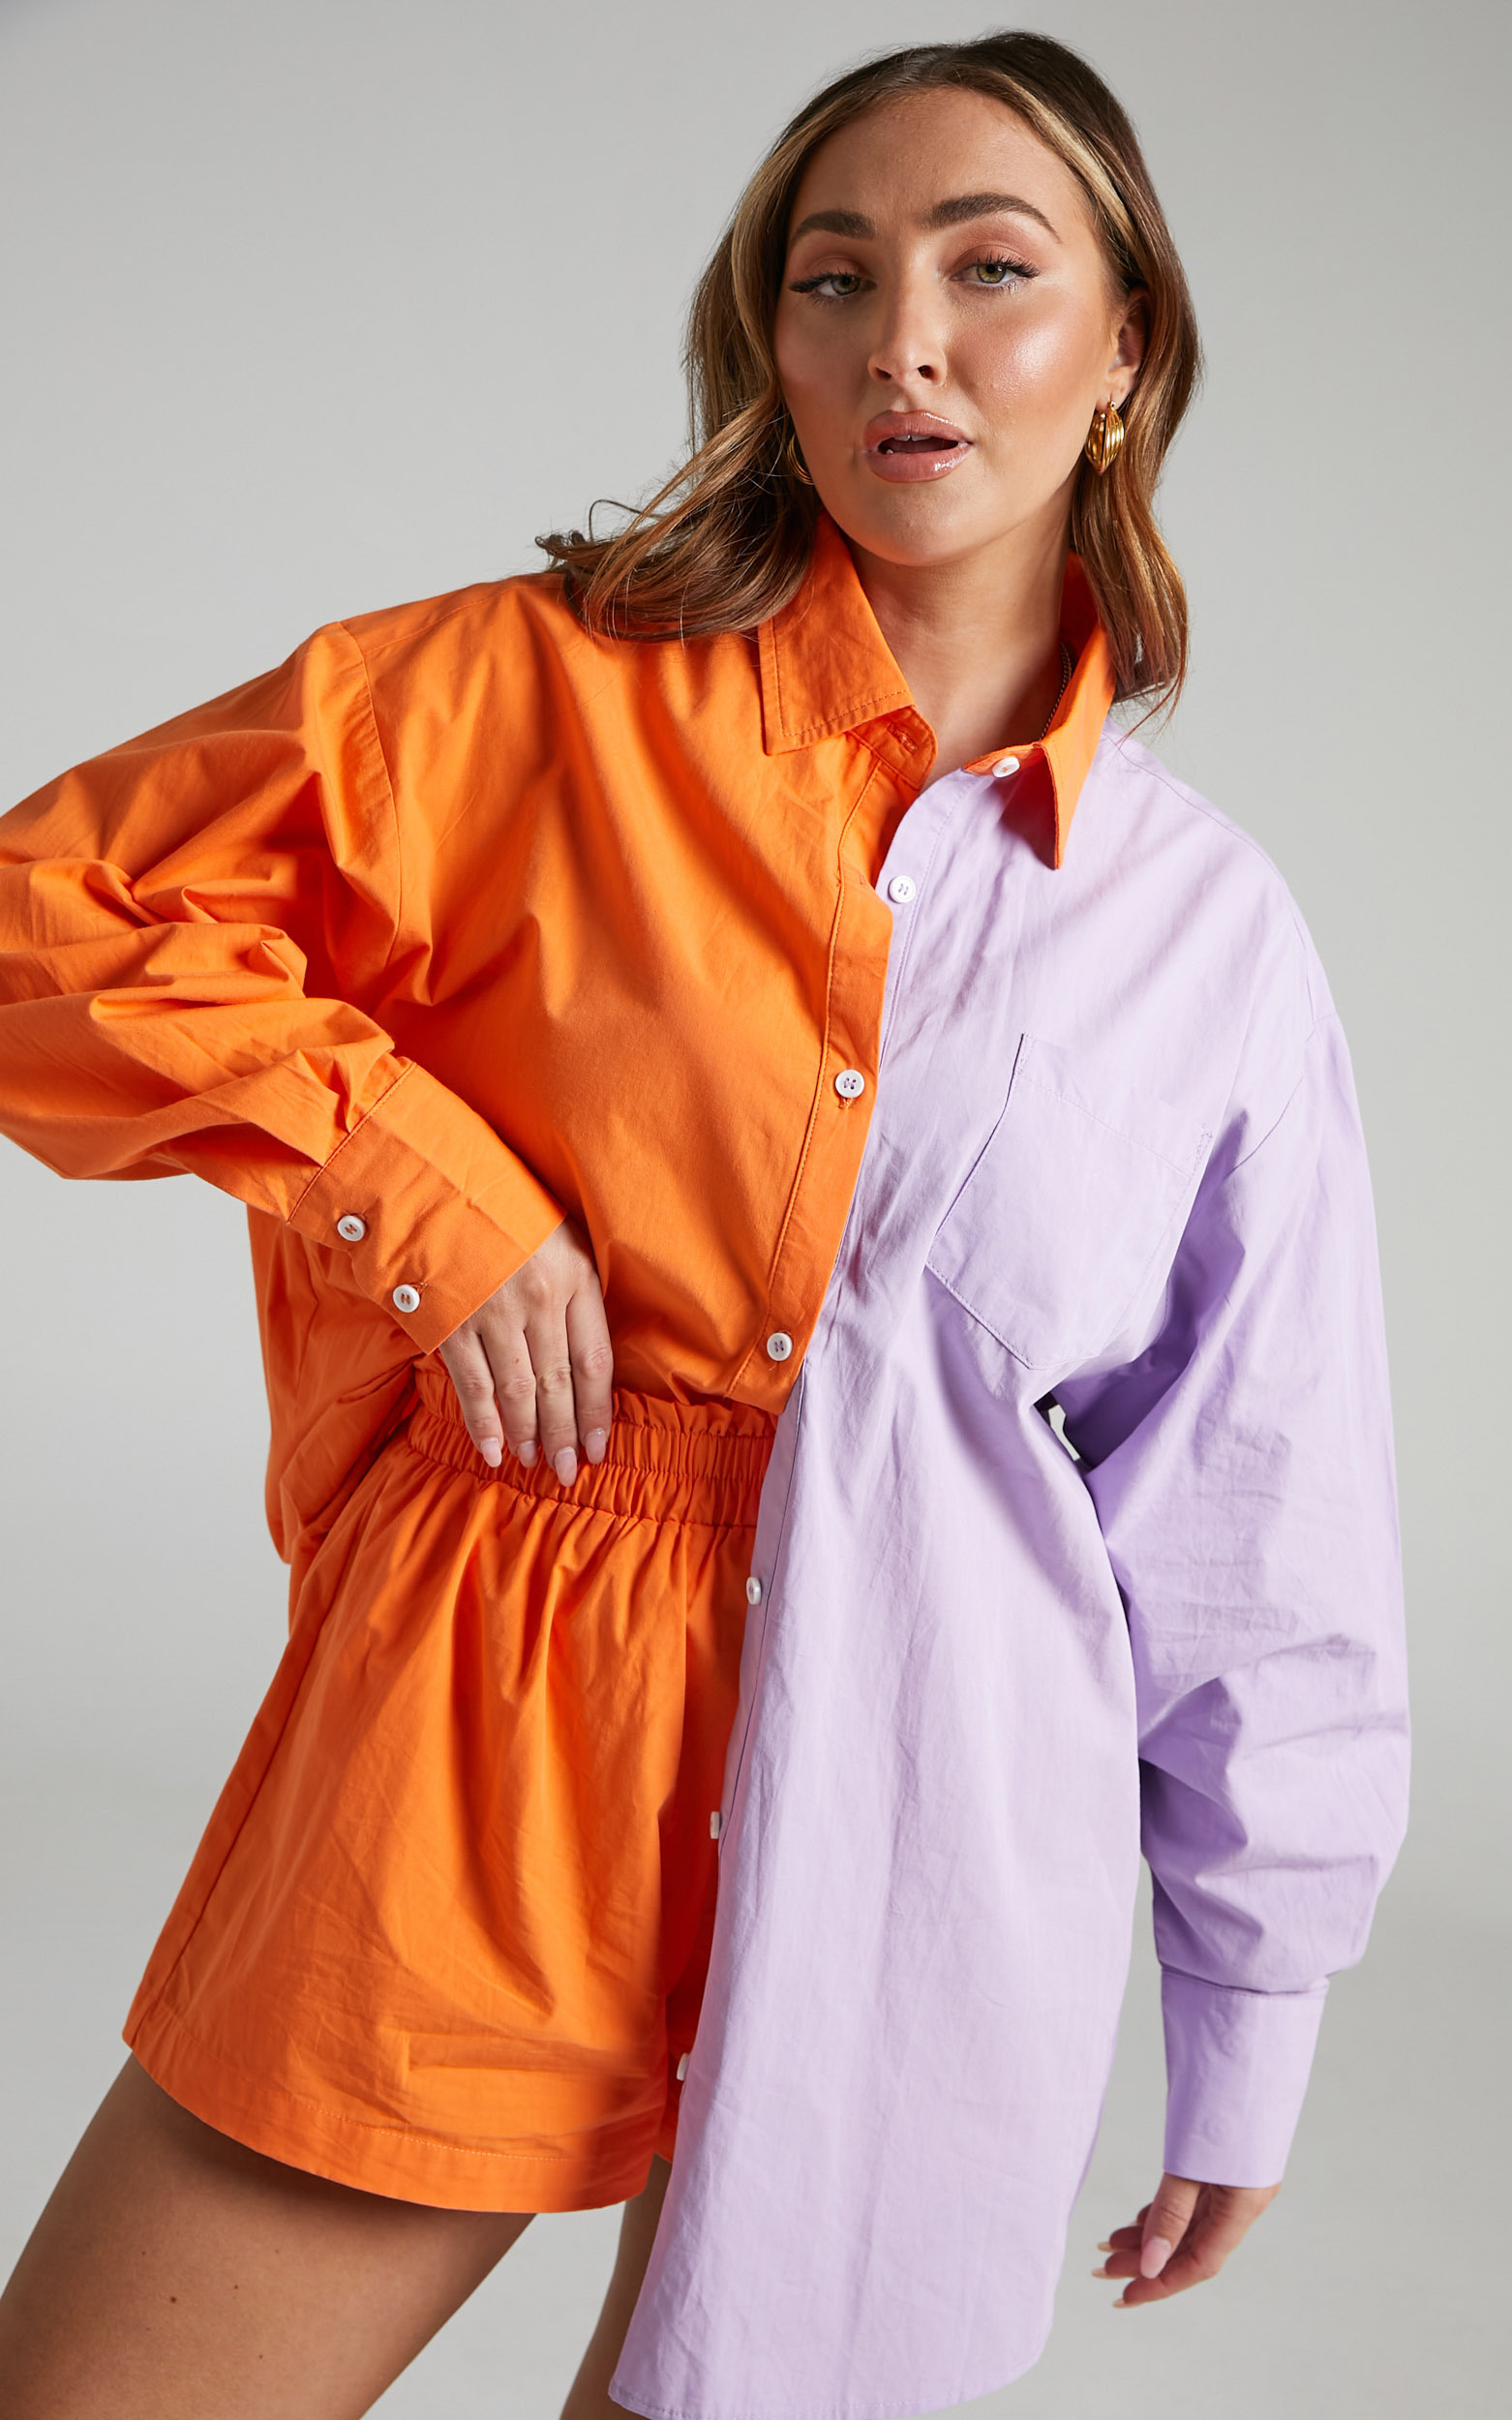 Roewe Colour Block Oversized Shirt in Orange & Lilac - 04, ORG4, hi-res image number null